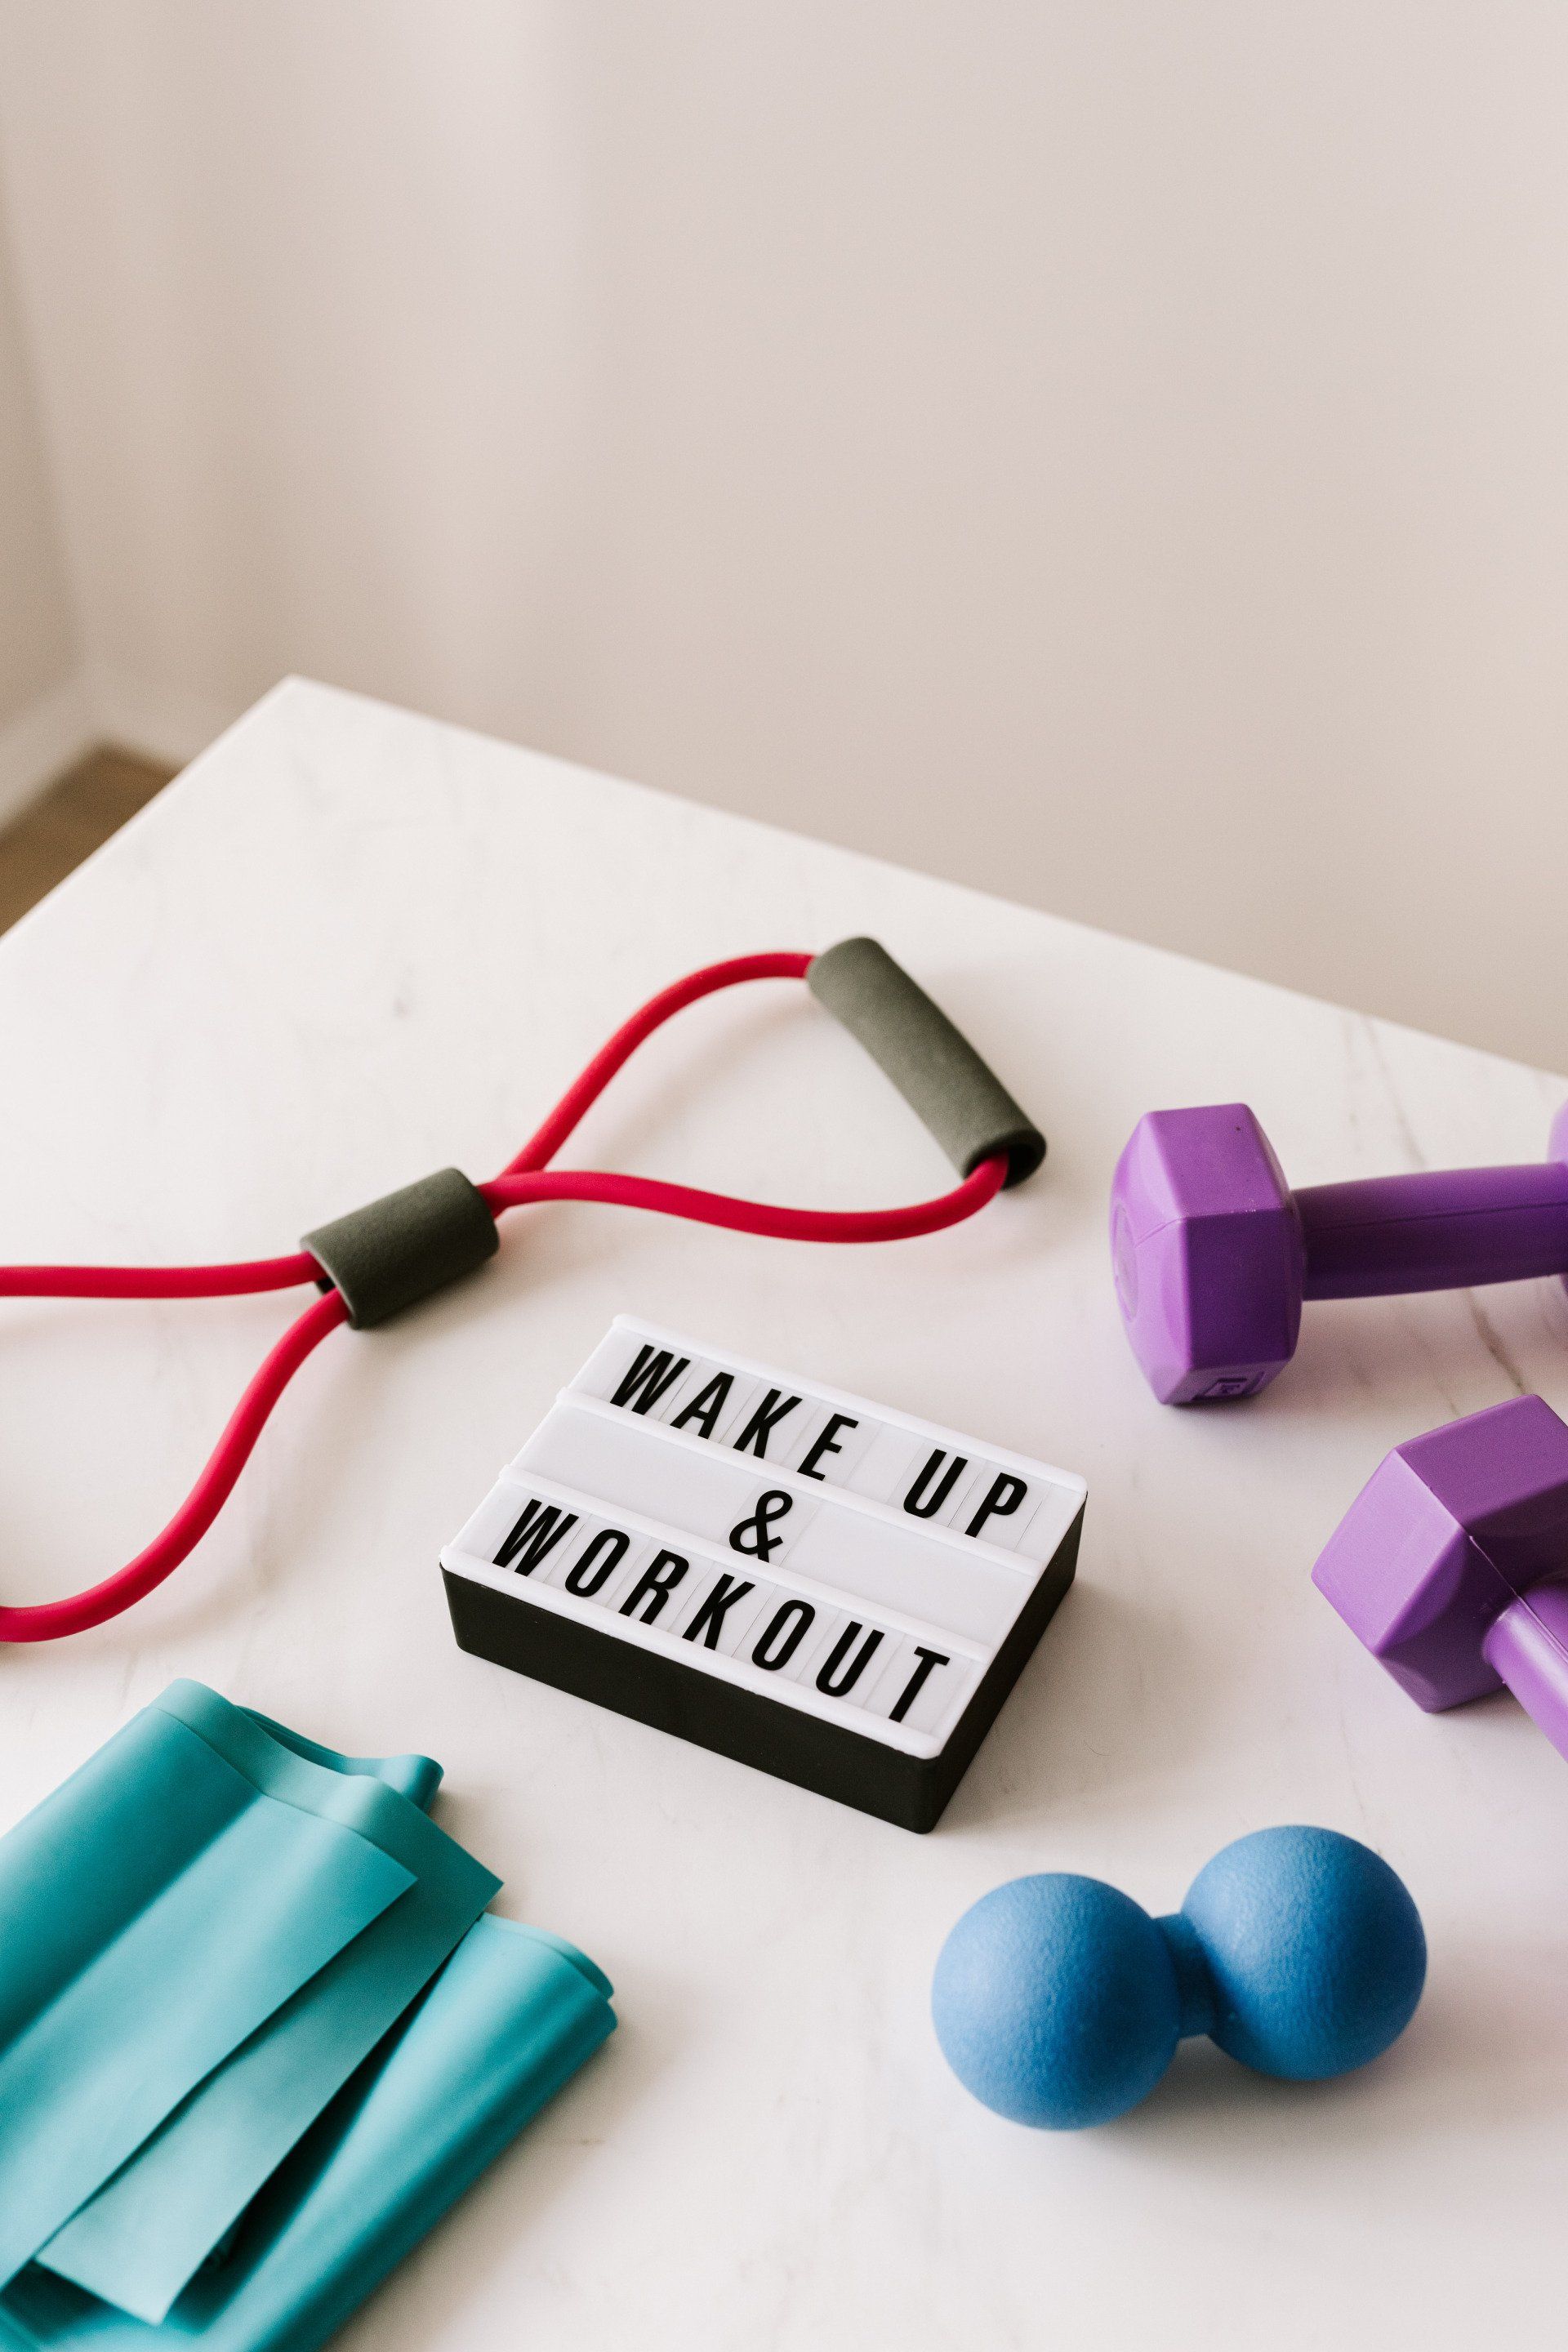 The photo captures a stretch band, a pair of weights, a stress ball, and an elastic band arranged around a small sign that reads 